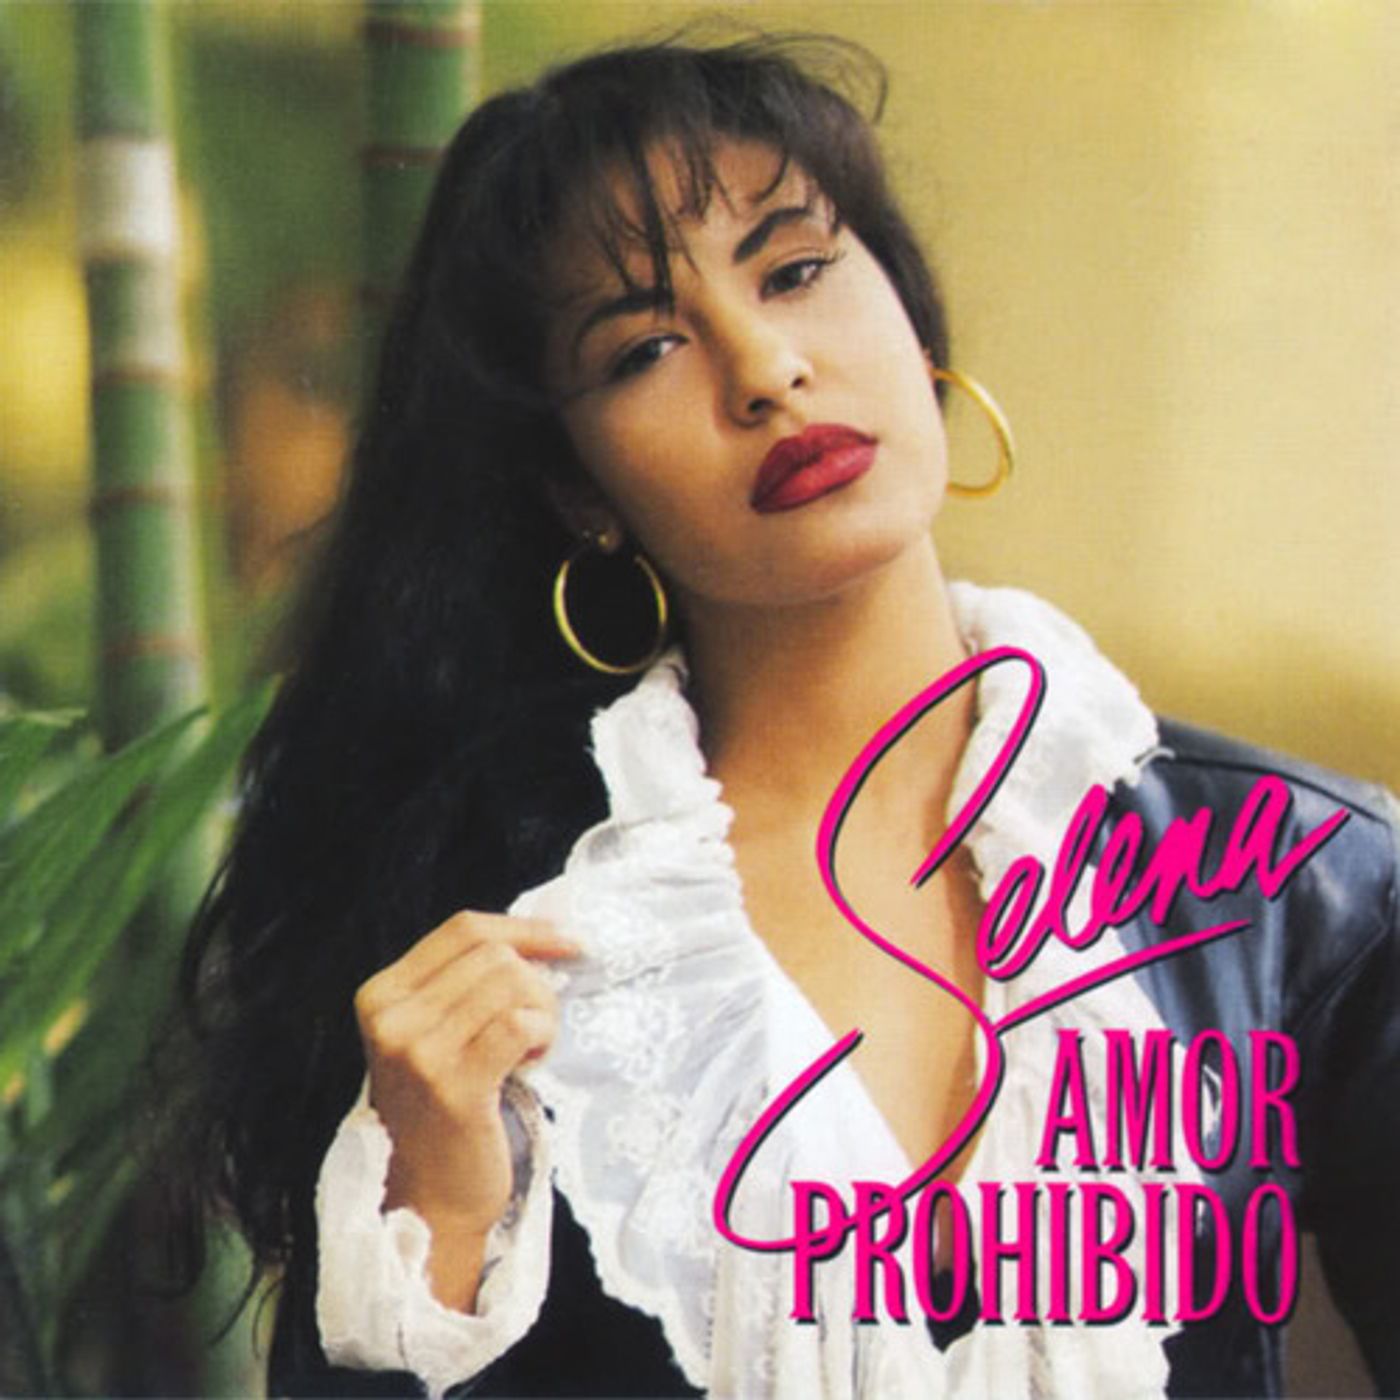 Thumbnail for "Episode 151: Amor Prohibido - Brought to you by Radio Menea".